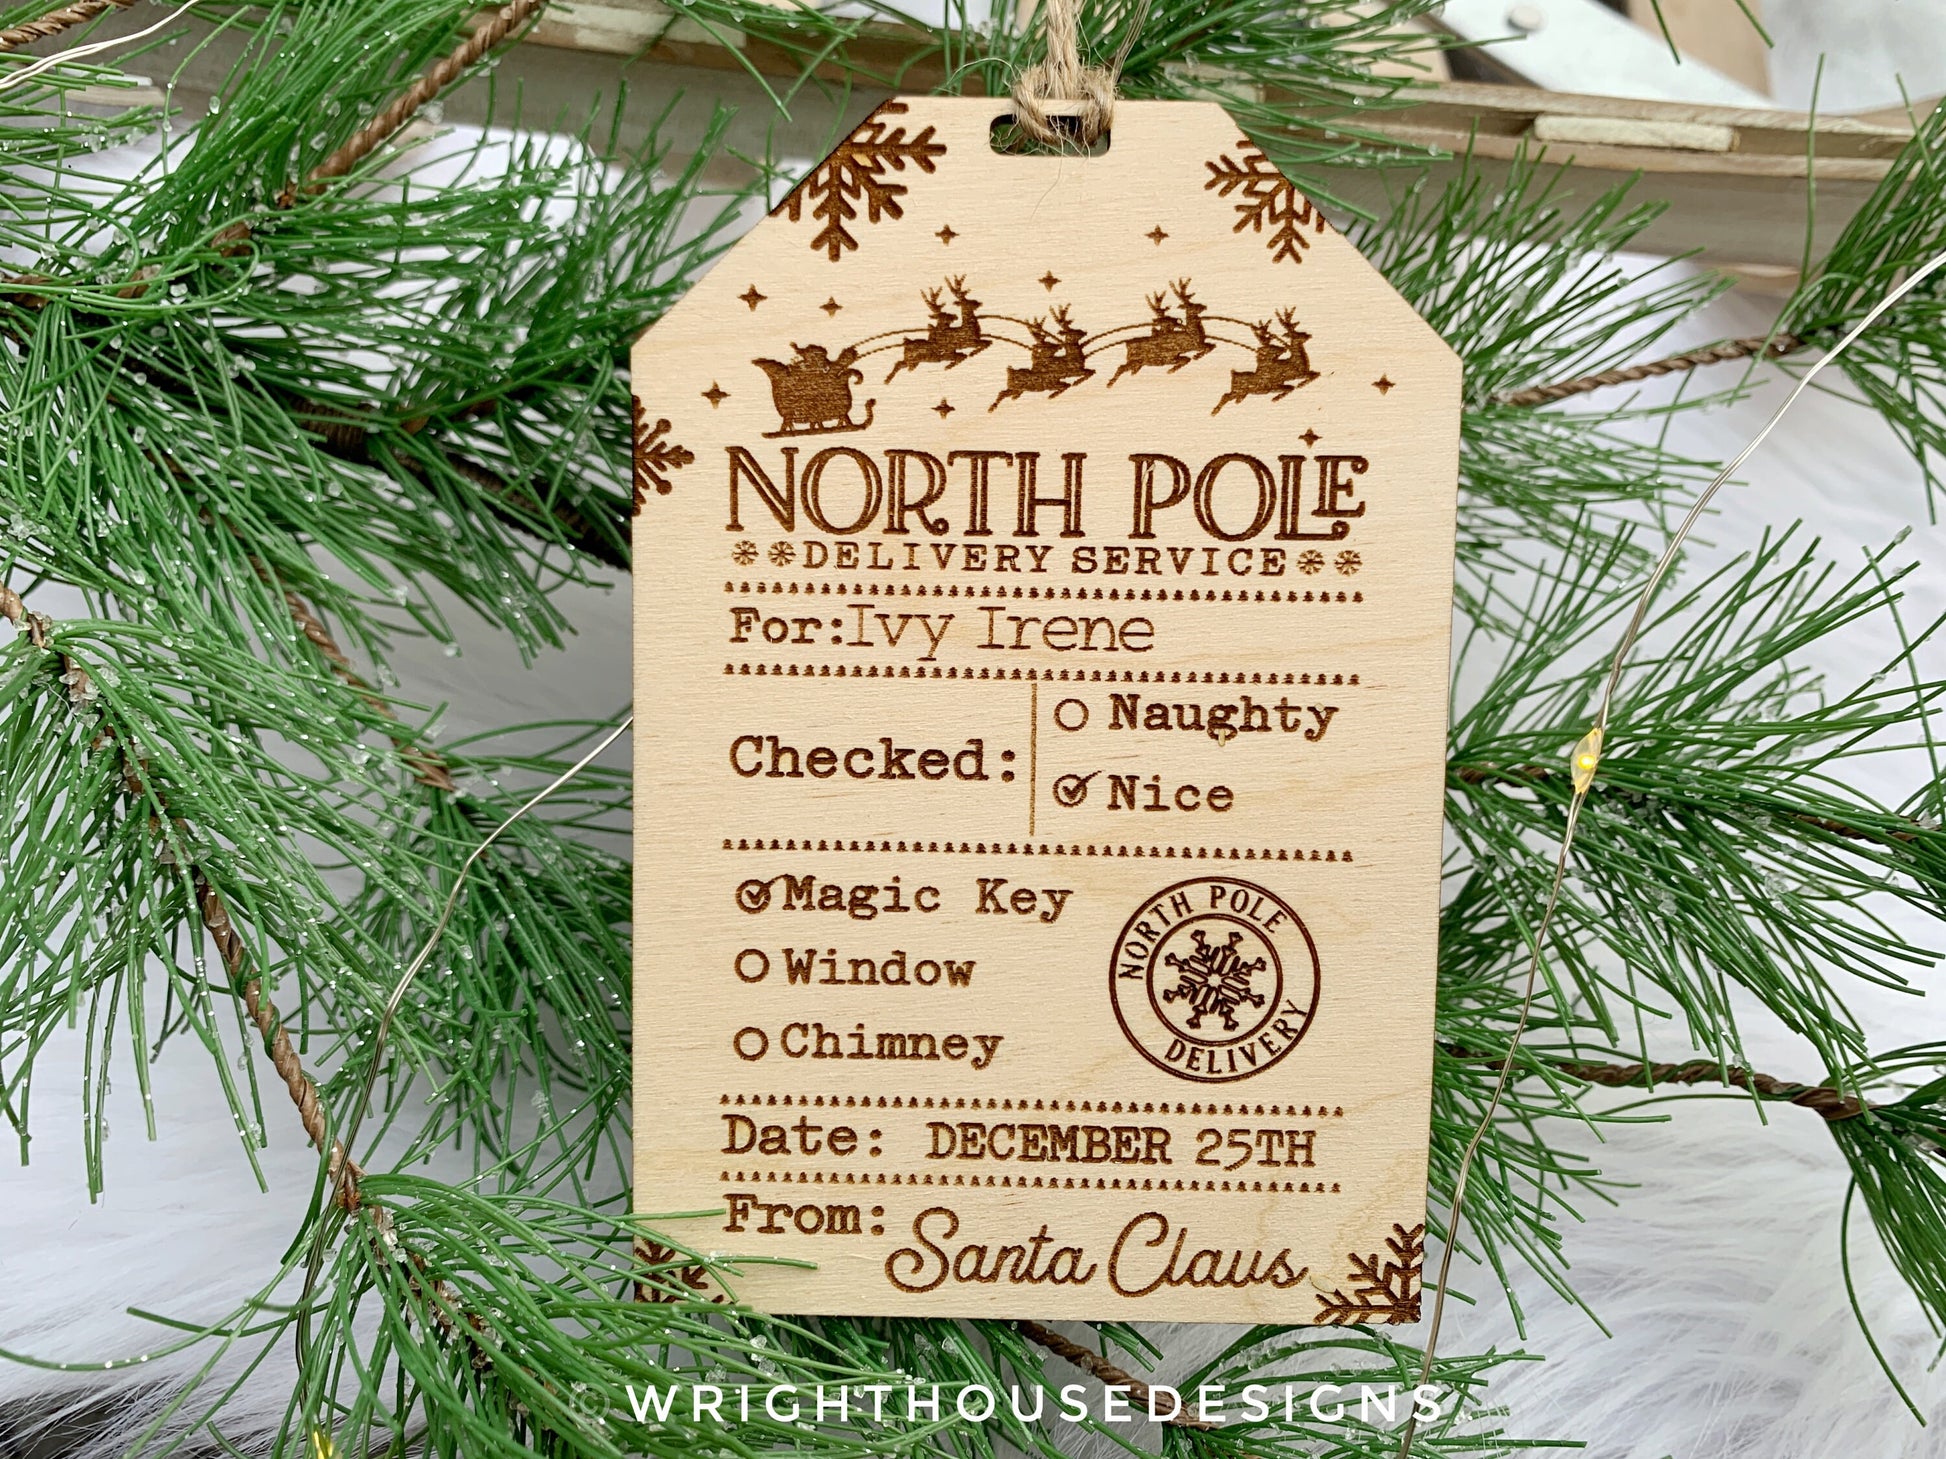 Santa's North Pole Express Delivery Gift Bag Tags - Wooden Engraved Christmas Labels - Personalized Name Tag - Holiday Ornament for Kids